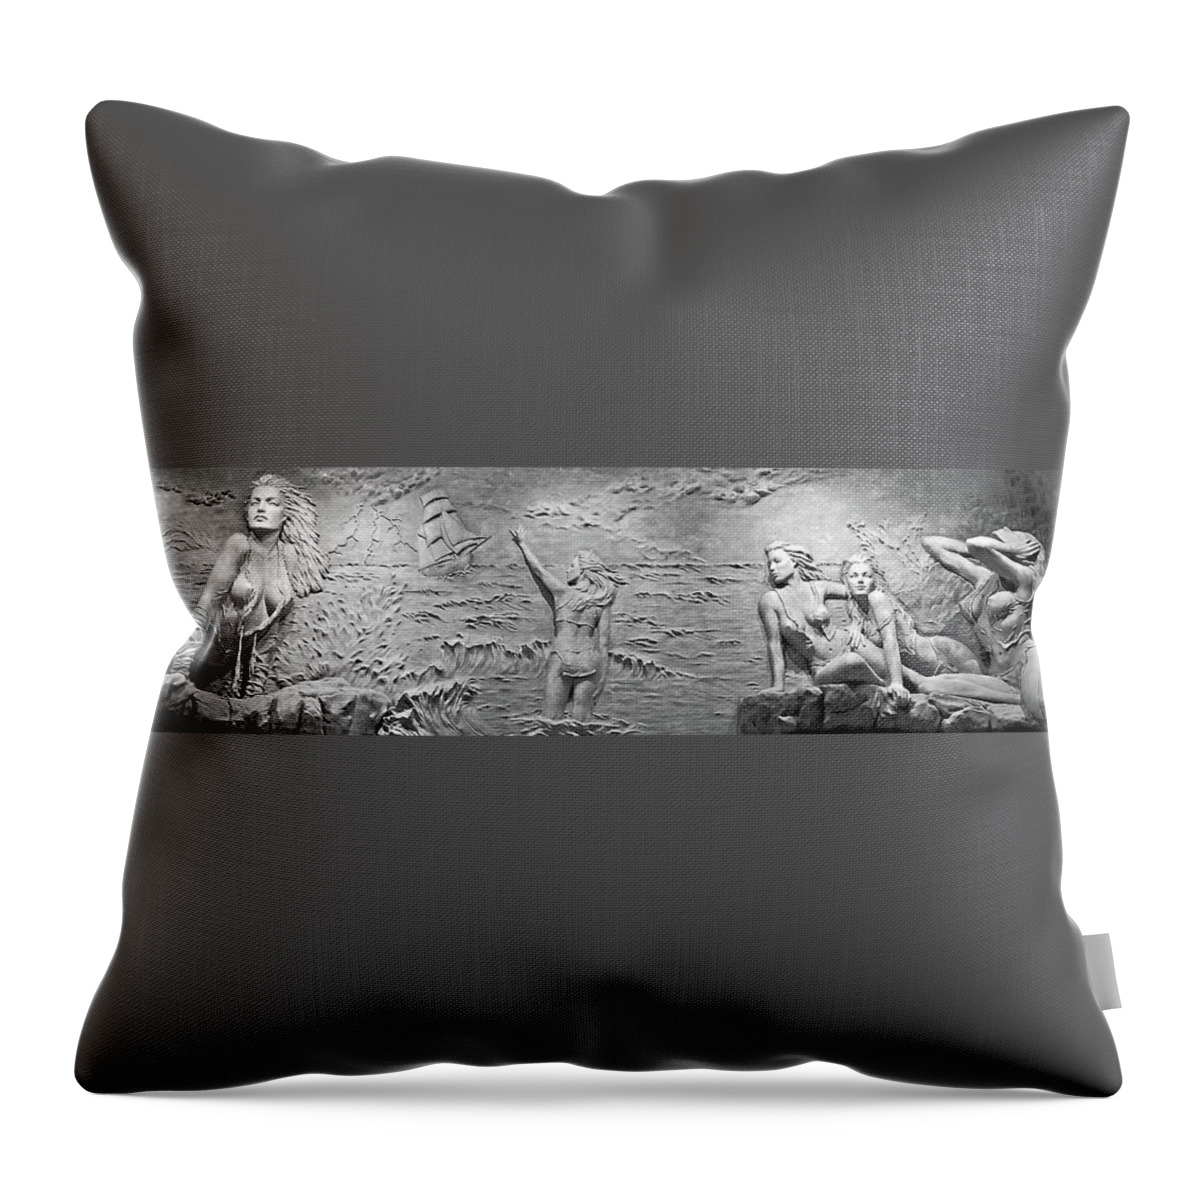 Sirens Throw Pillow featuring the photograph Sirens by Kristin Elmquist